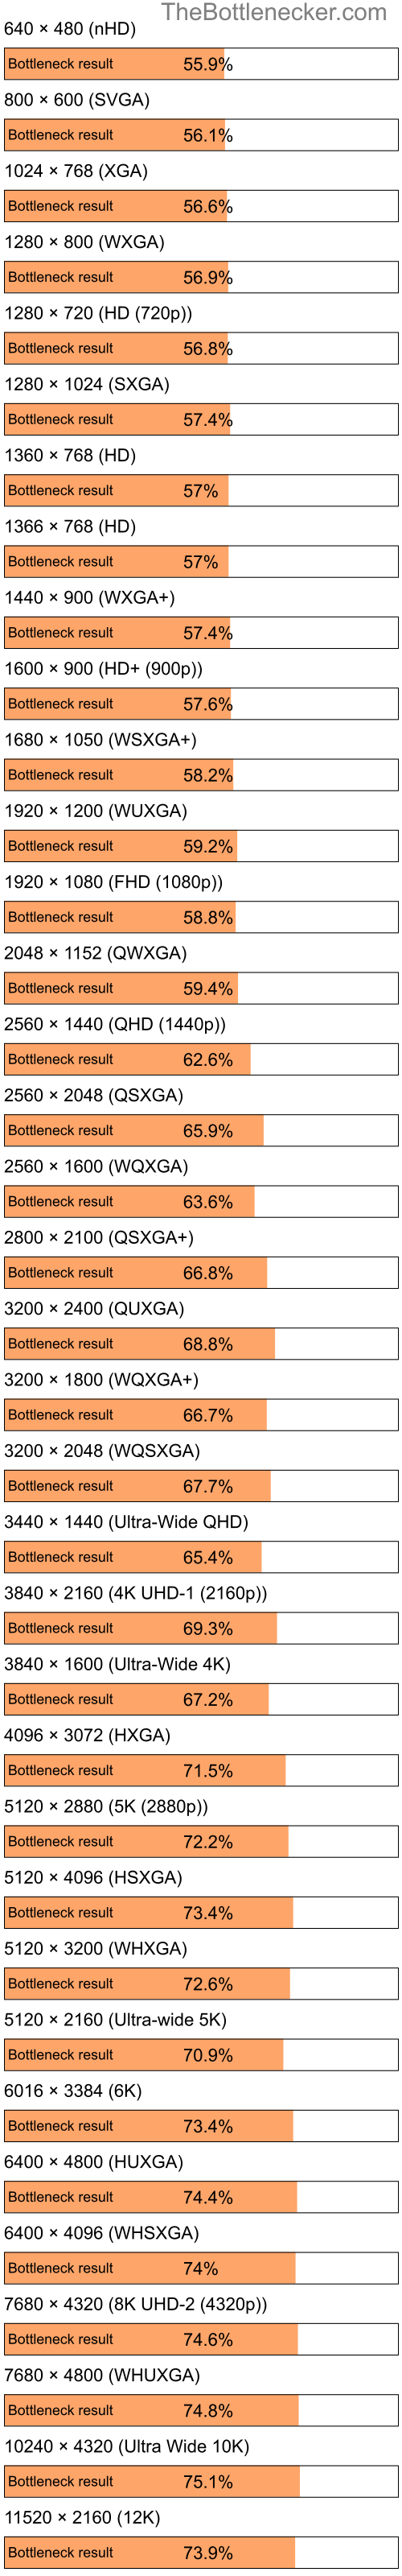 Bottleneck results by resolution for Intel Atom Z520 and NVIDIA Quadro FX 370 in Processor Intense Tasks